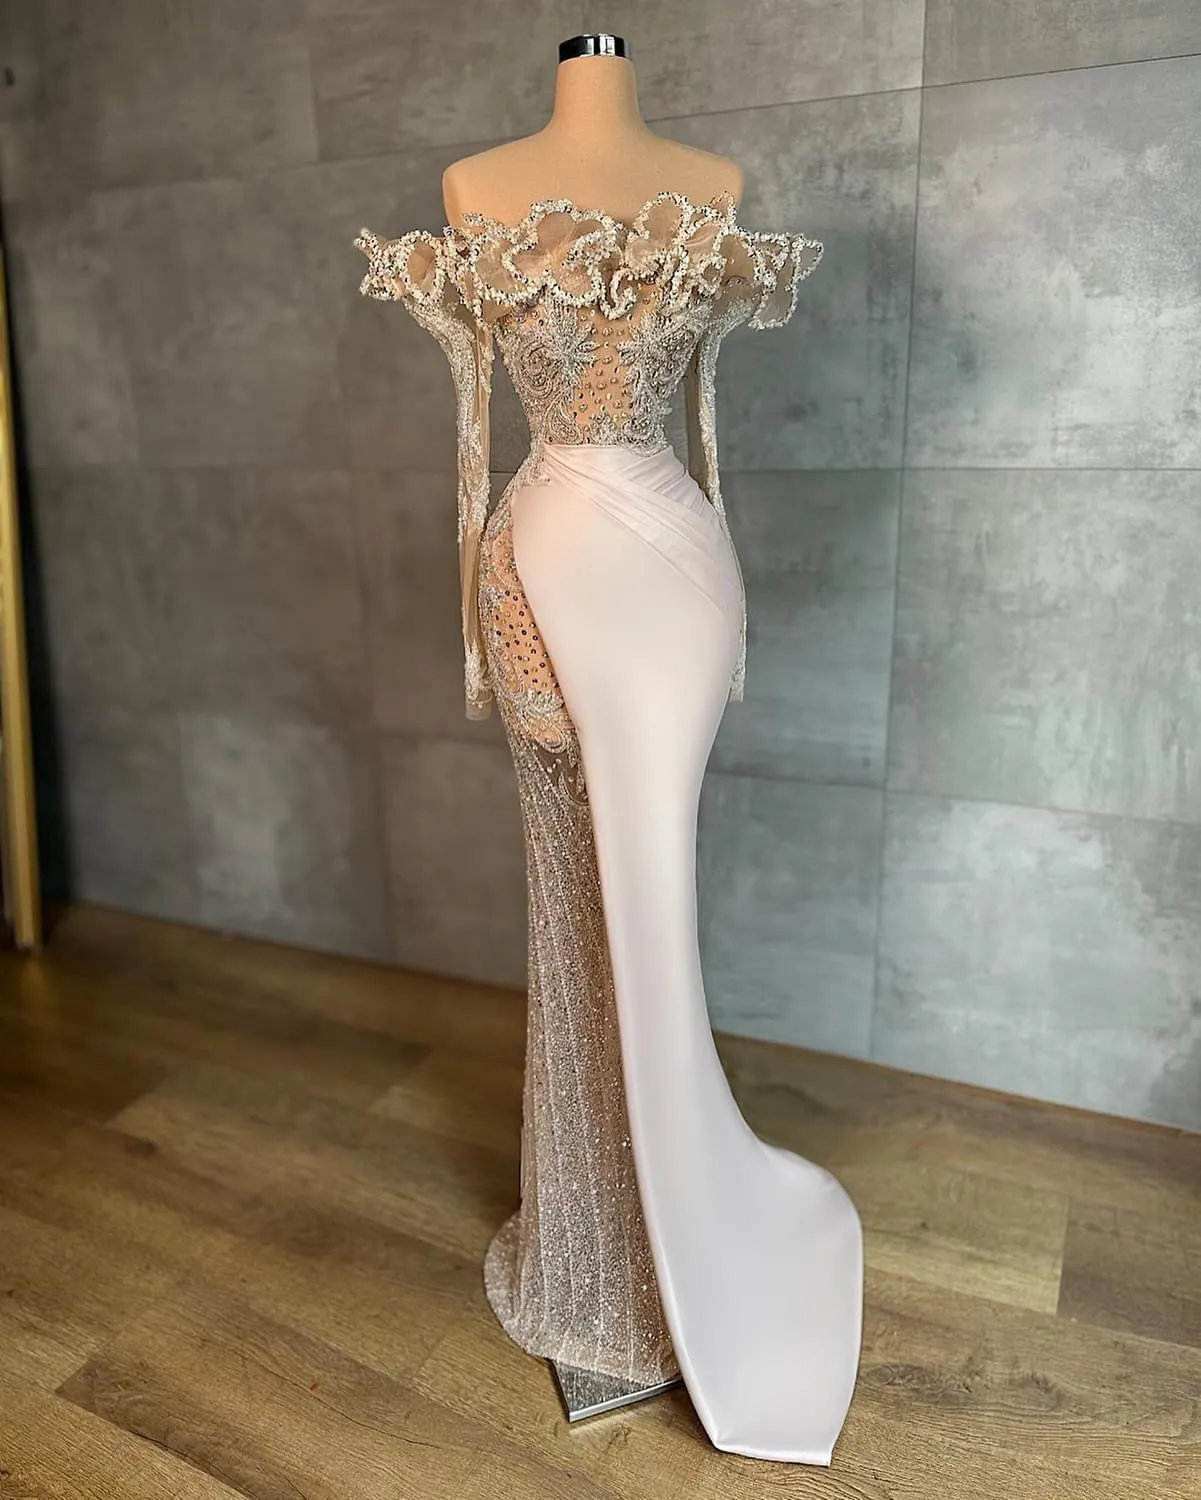 2023 May Aso Ebi Beaded Crystals Prom Dress Mermaid Satin Luxurious Evening Formal Party Second Reception Birthday Engagement Gowns Dress Robe De Soiree ZJ320